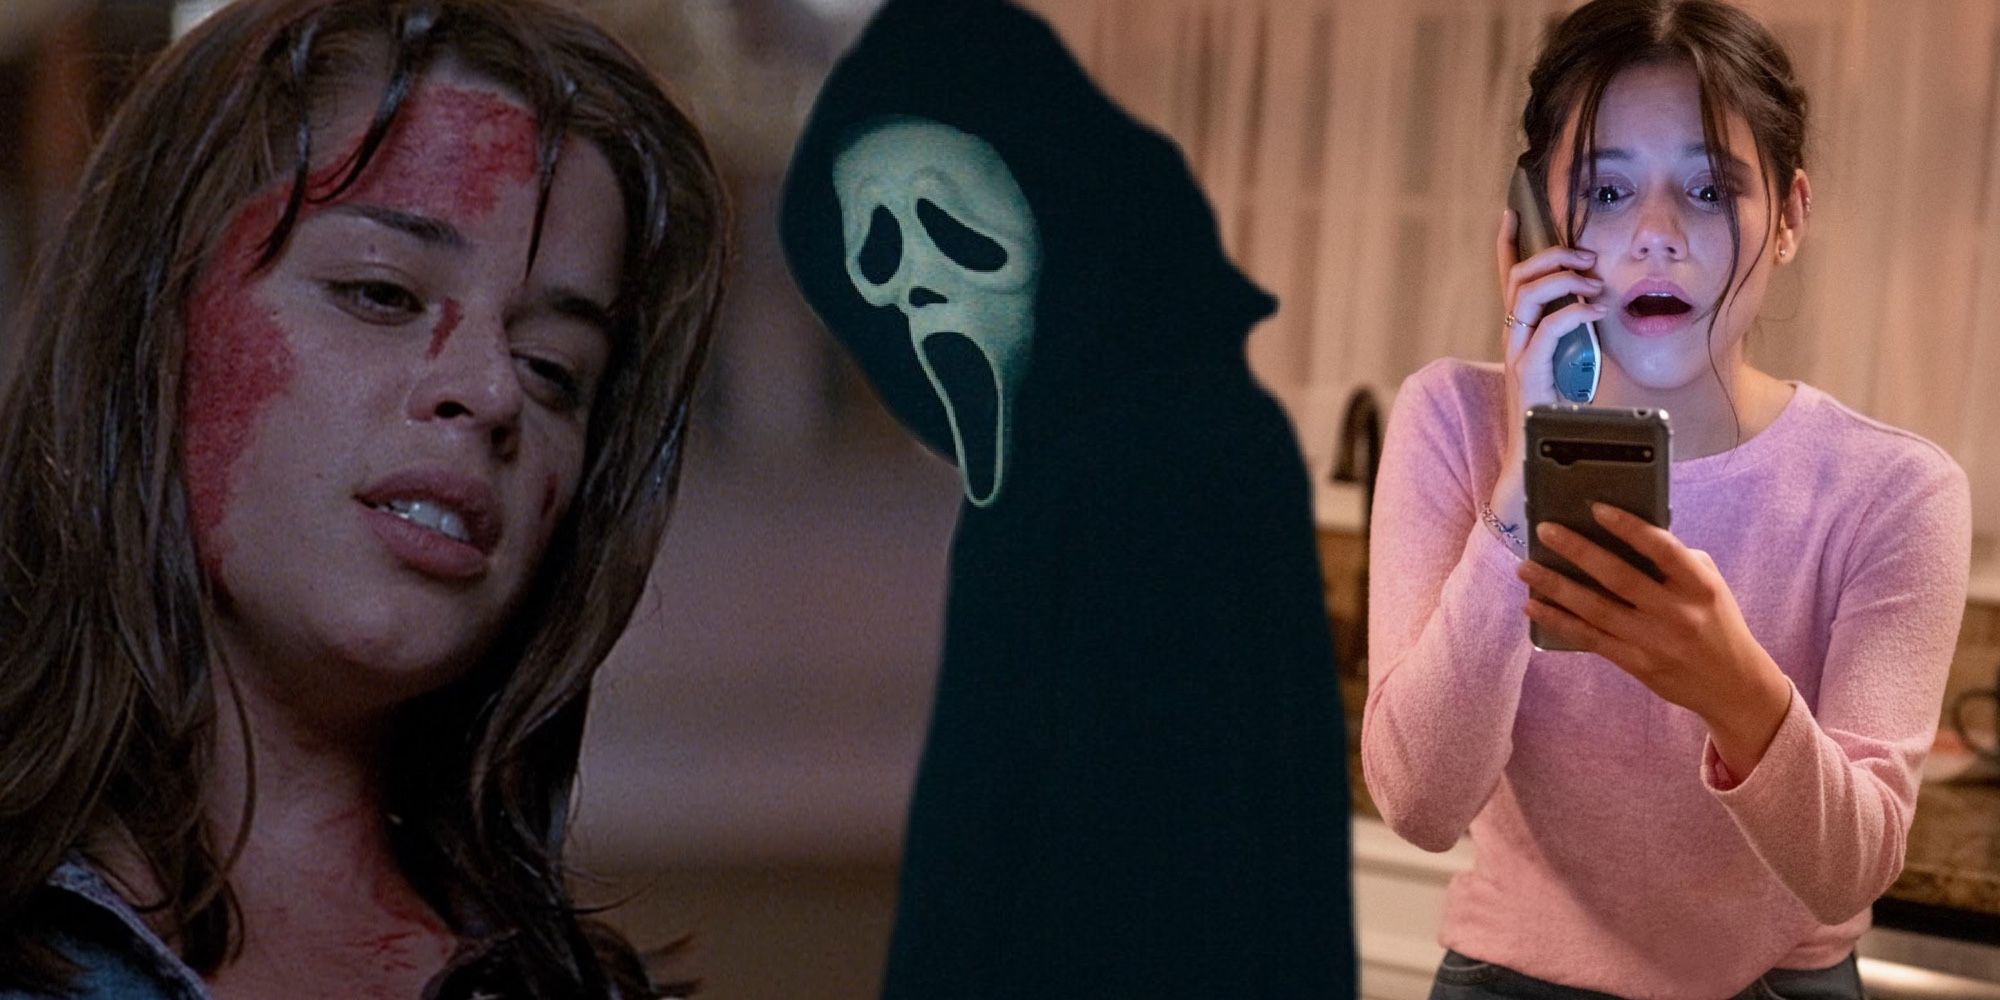 A composite image of characters from the Scream movies with Ghostface